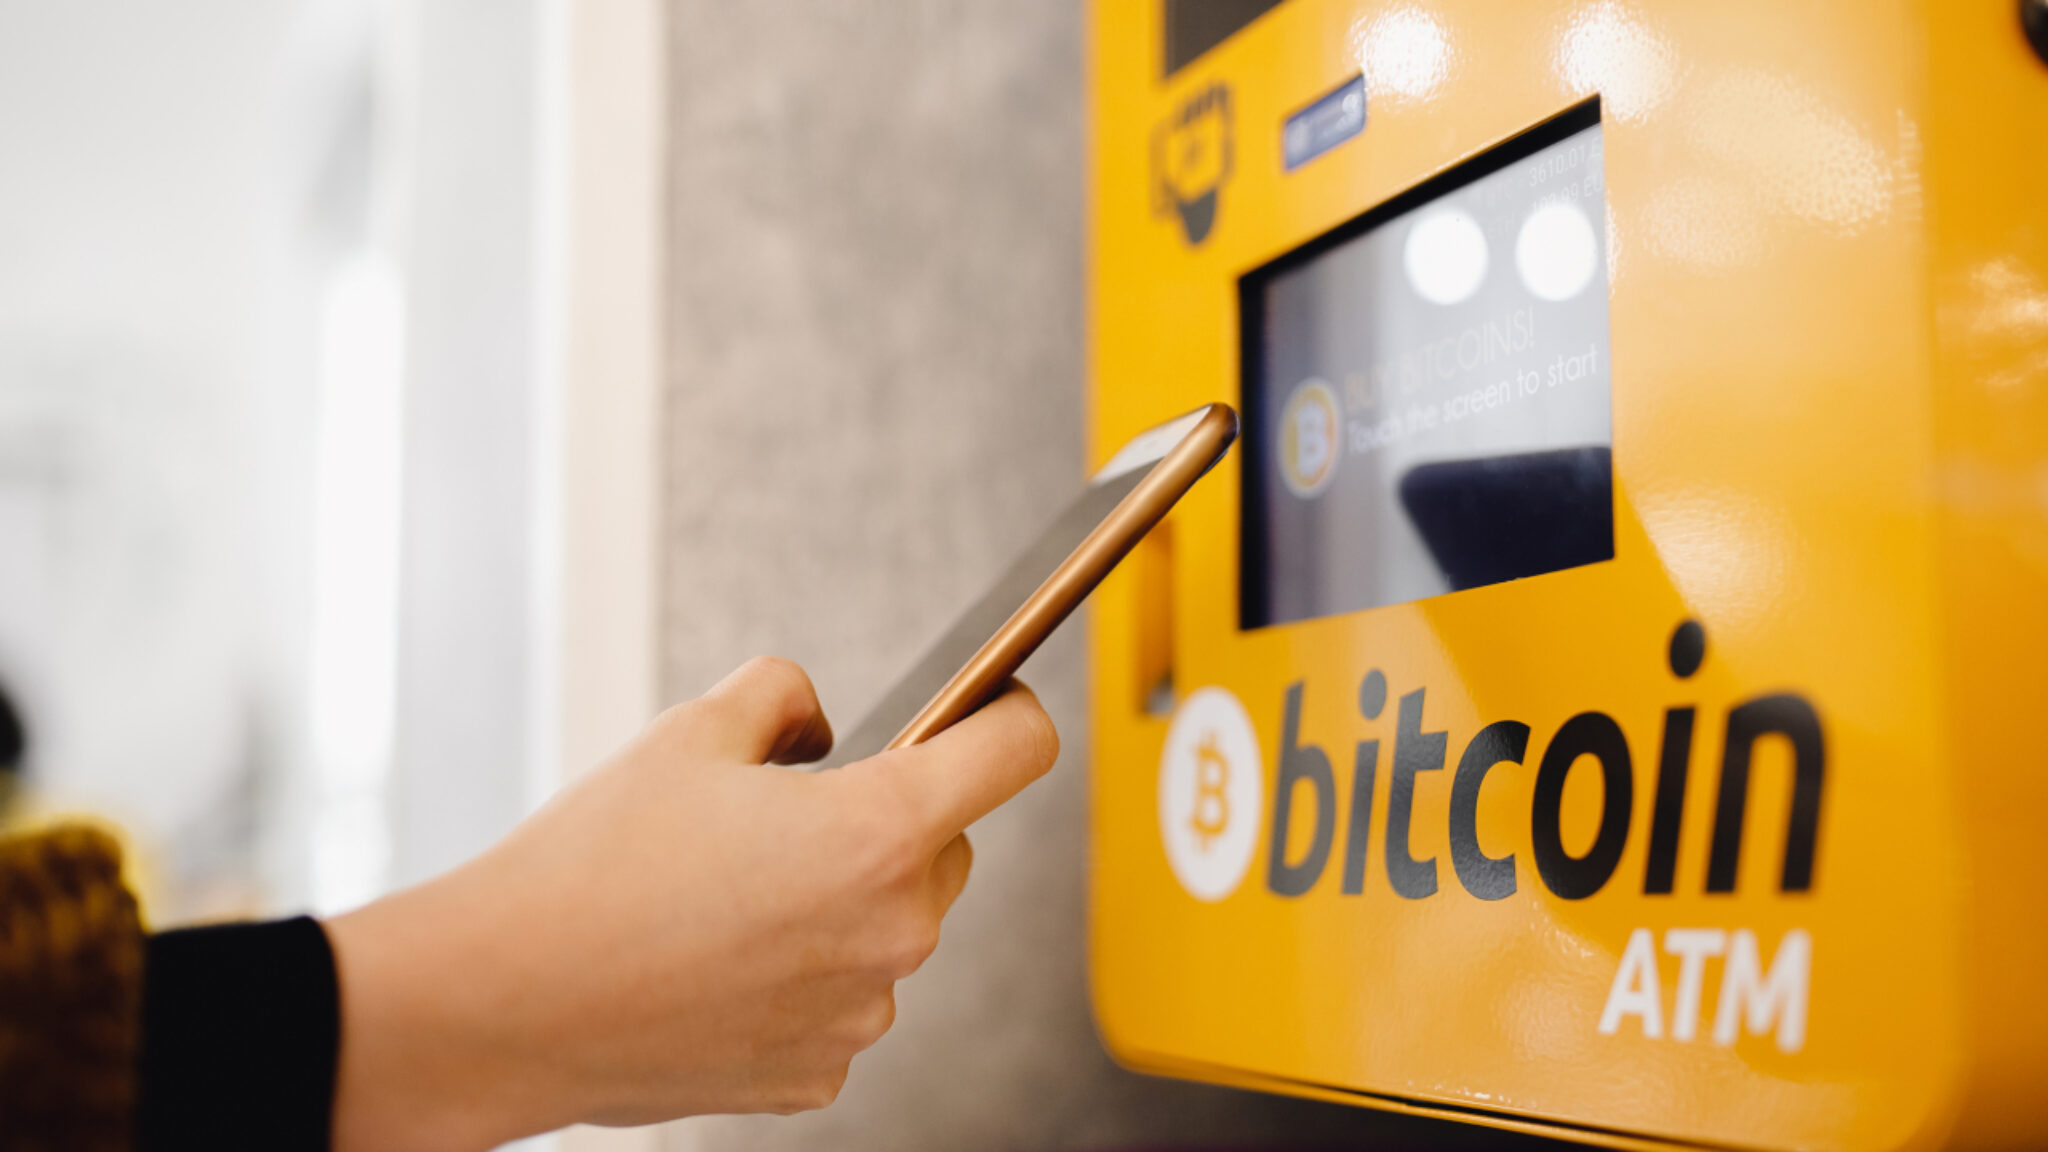 Over 7,000 cryptocurrency ATMs have already been installed worldwide.